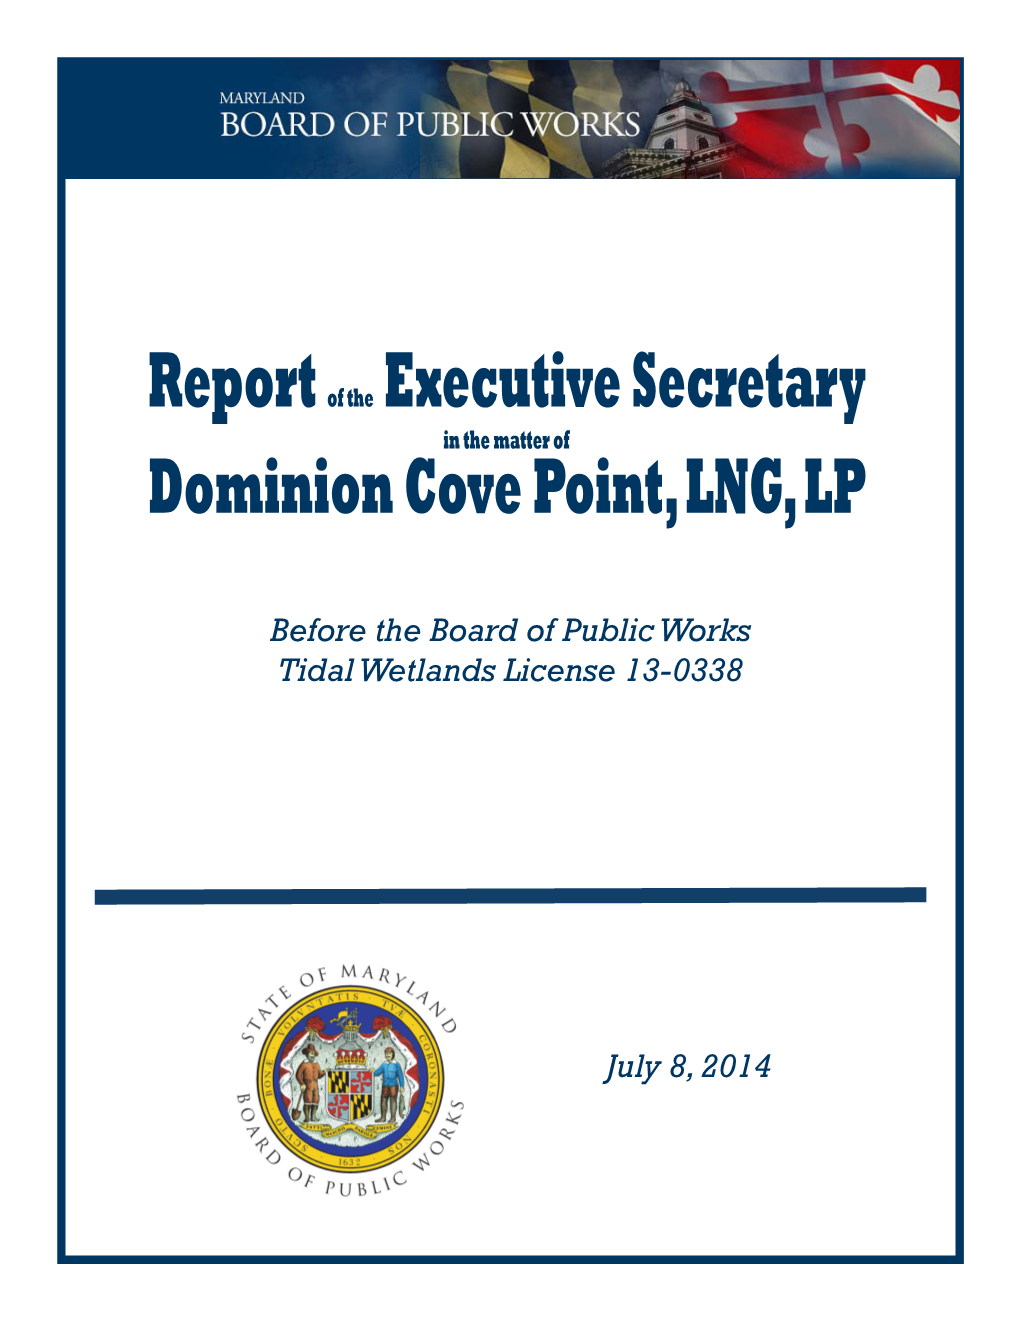 Dominion Cove Point, LNG, LP Report of the Executive Secretary